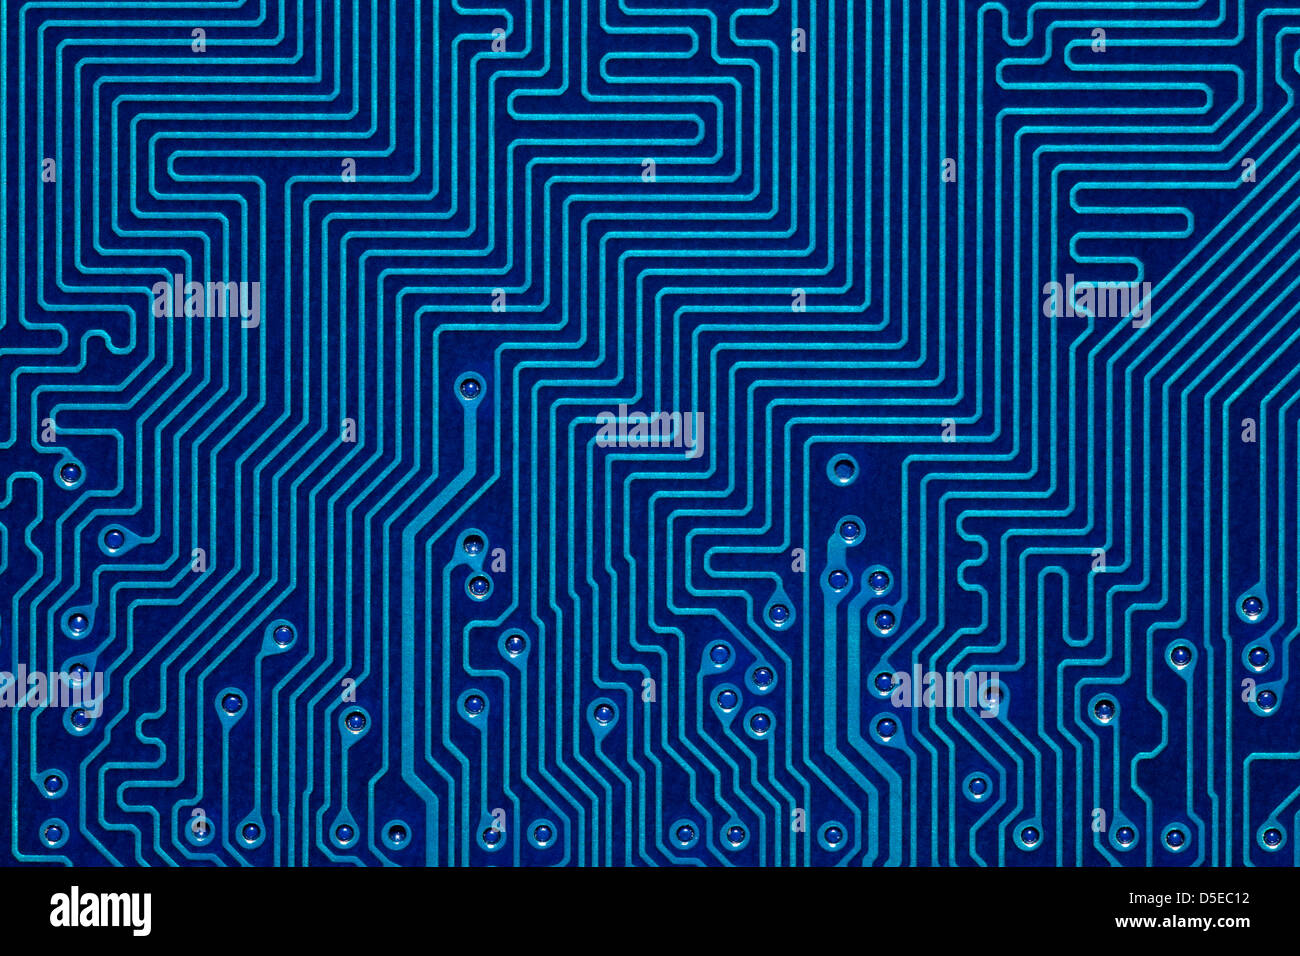 blue printed circuit board or abstract background Stock Photo